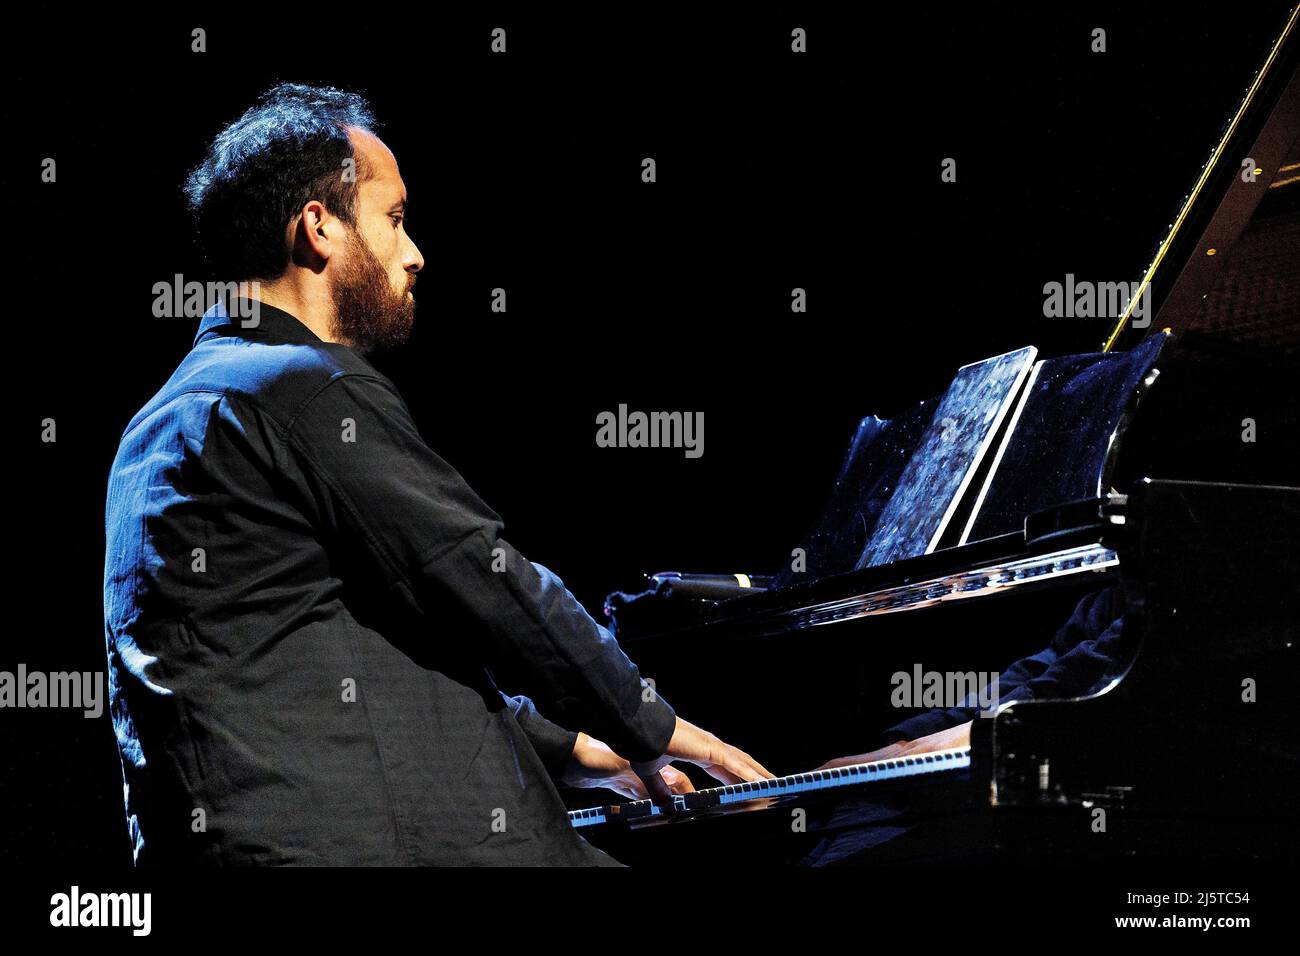 Berlin, Germany. 25th Apr, 2022. Pianist Igor Levit plays at a benefit concert for Ukraine at the Berliner Ensemble. Credit: Carsten Koall/dpa/Alamy Live News Stock Photo